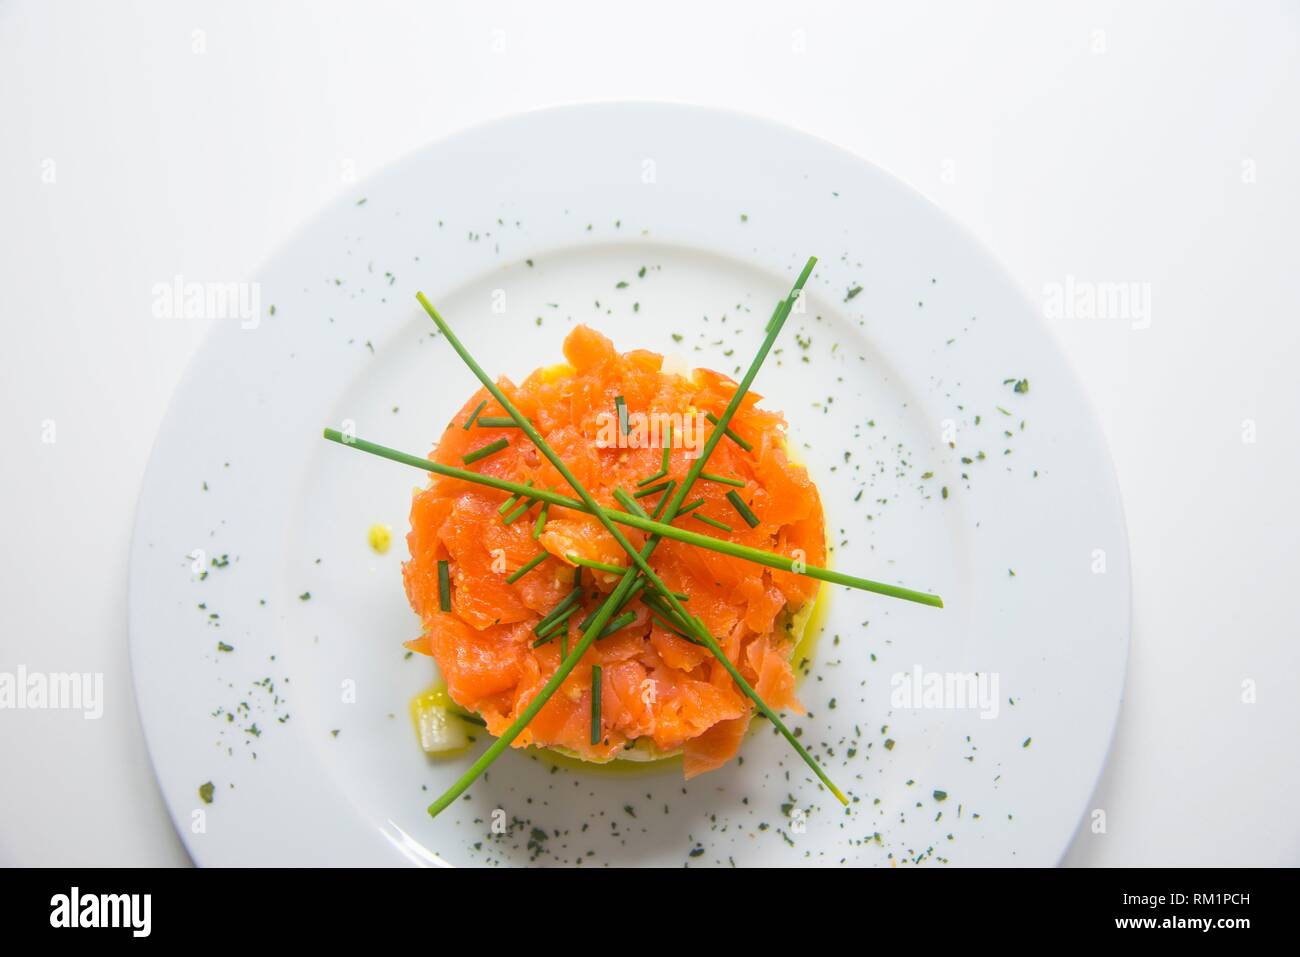 Smoked salmon salad. View from above. Stock Photo